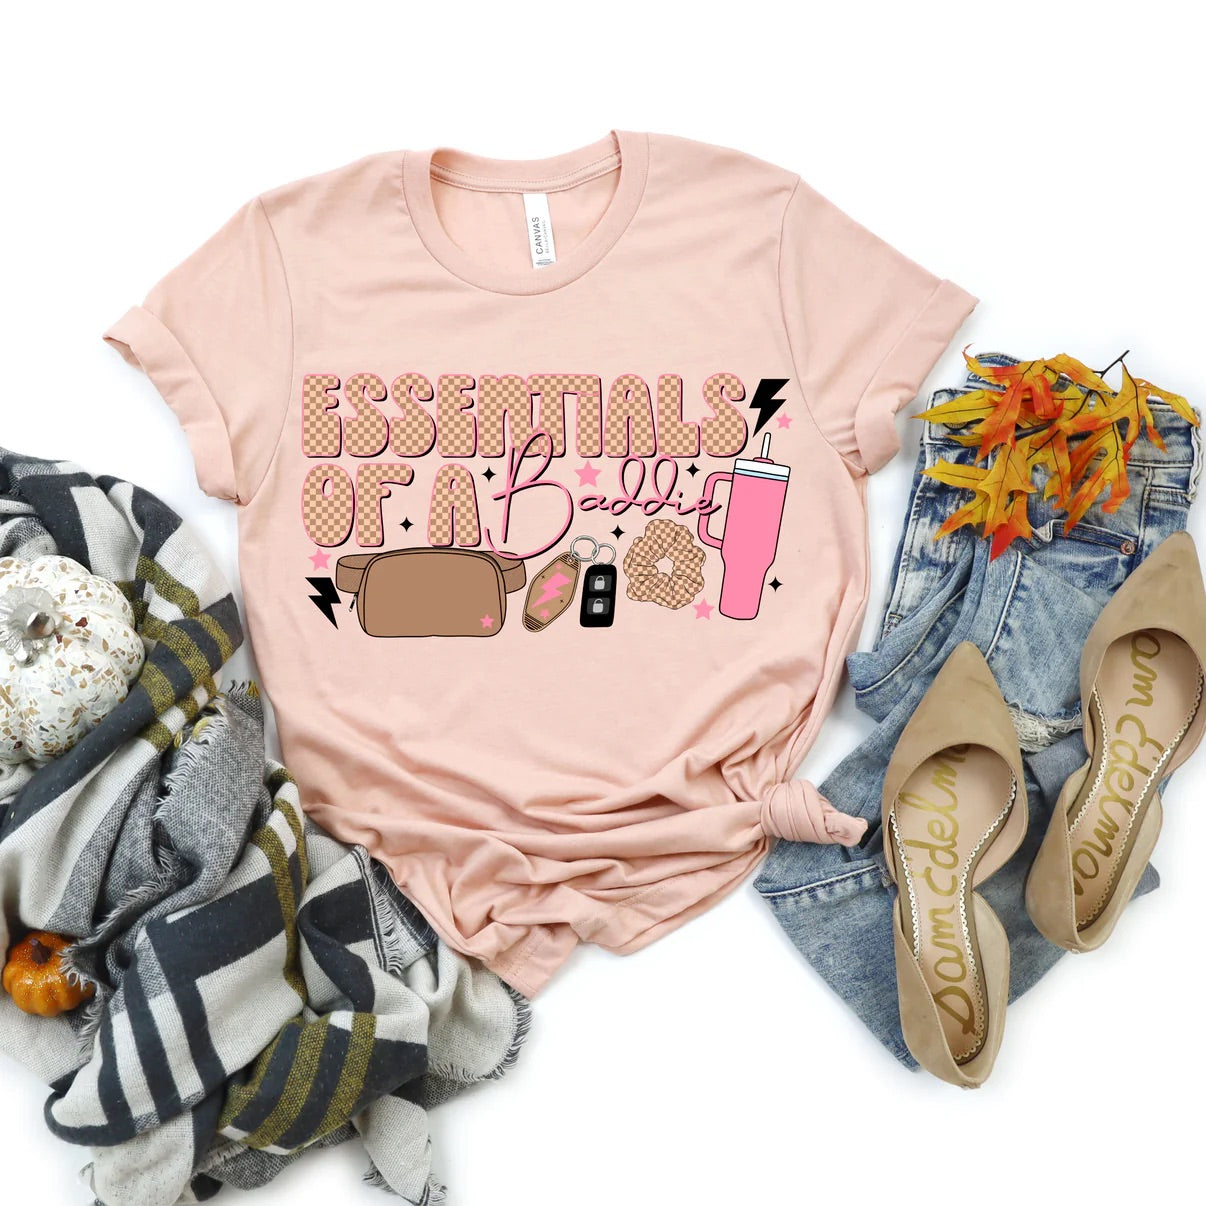 Essentials Of A Baddie Tee *MADE TO ORDER*